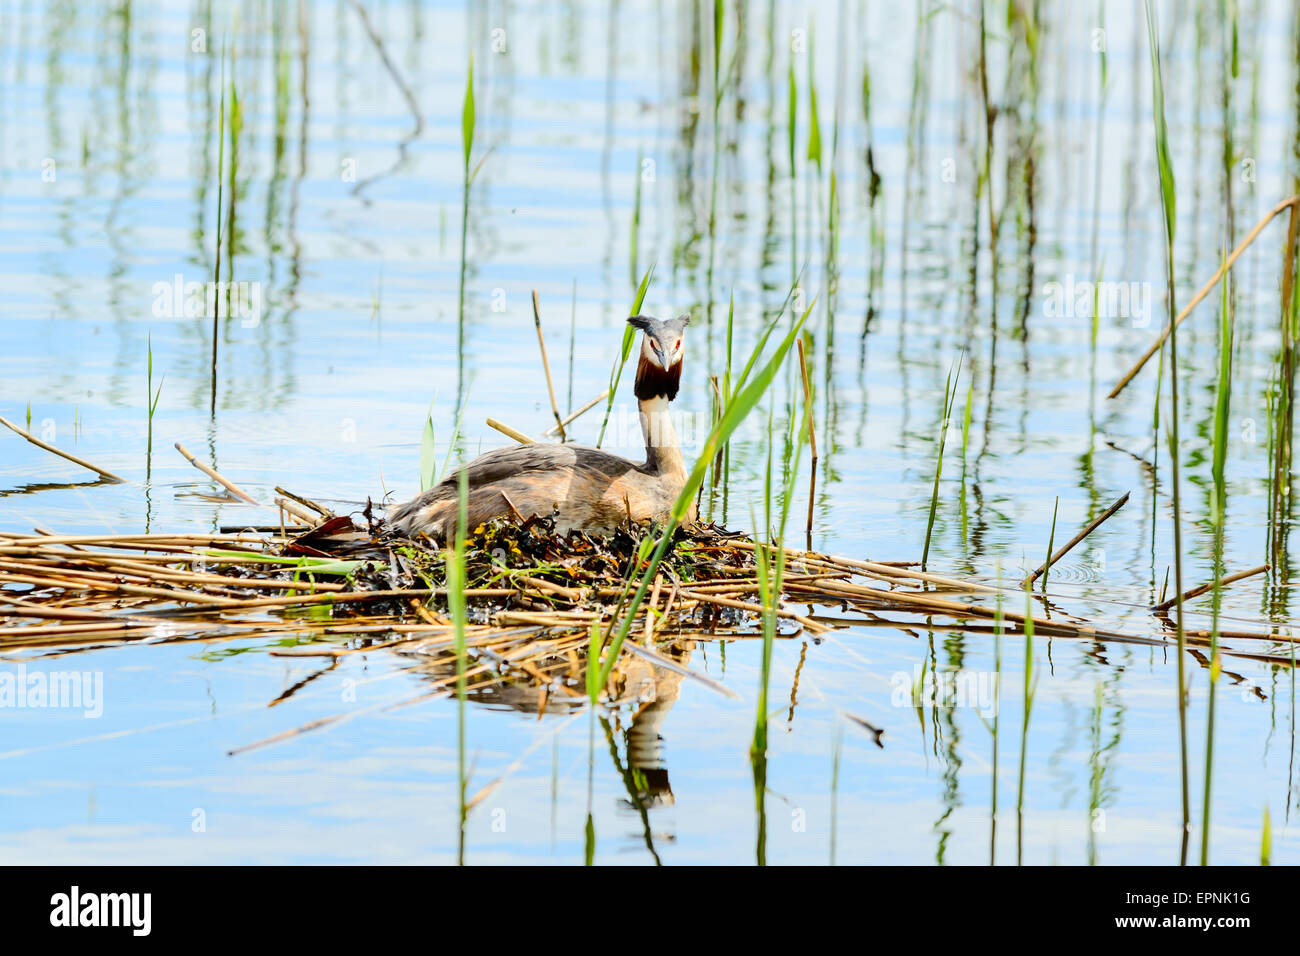 Nesting great crested grebe (Podiceps cristatus). Here seen on nest in water and weed. Stock Photo